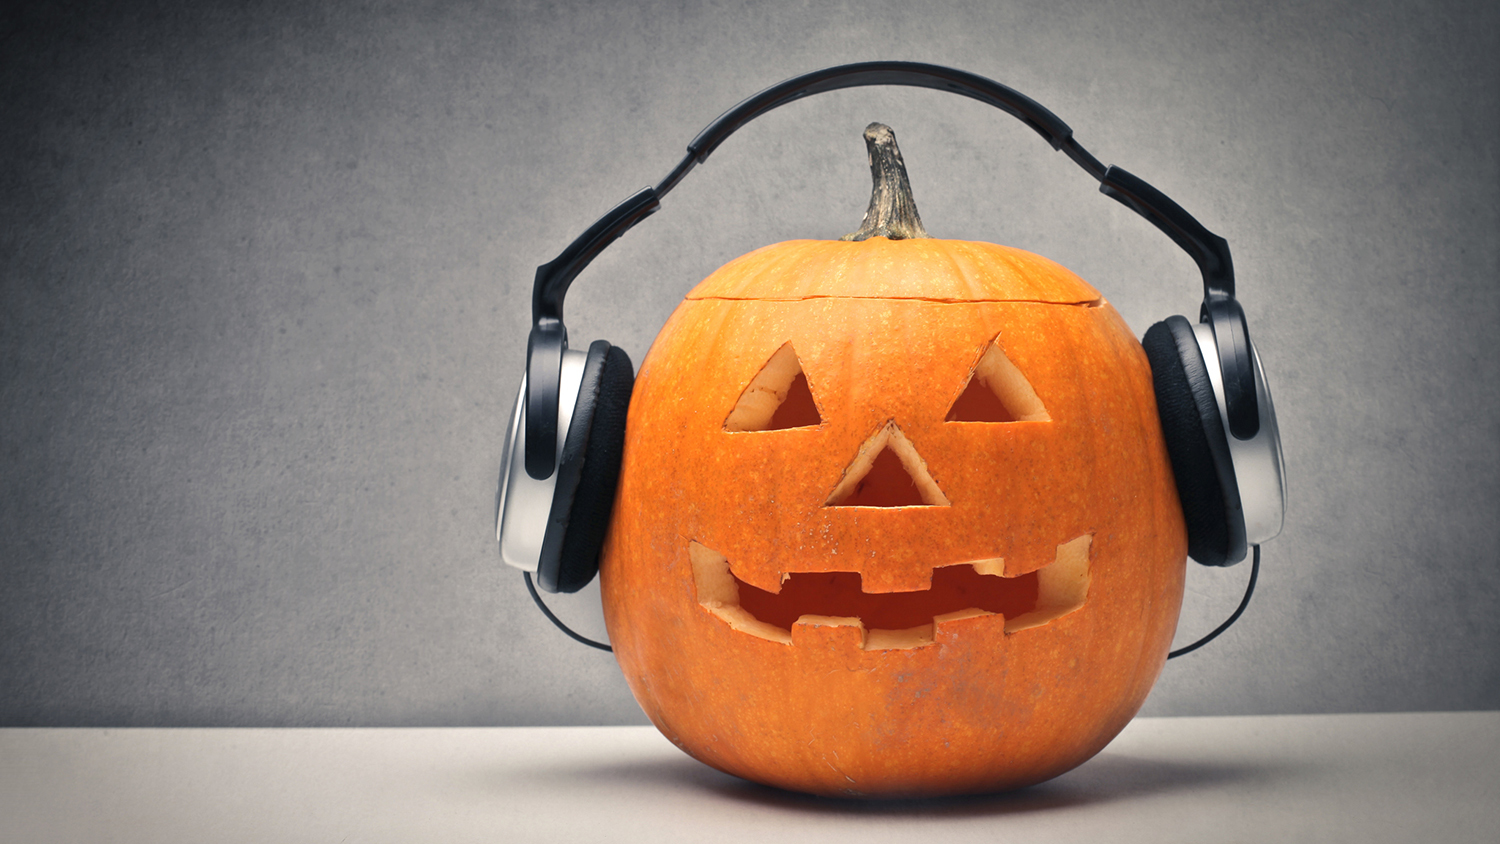 Get Your Halloween Party Started with These Spooky Halloween Songs